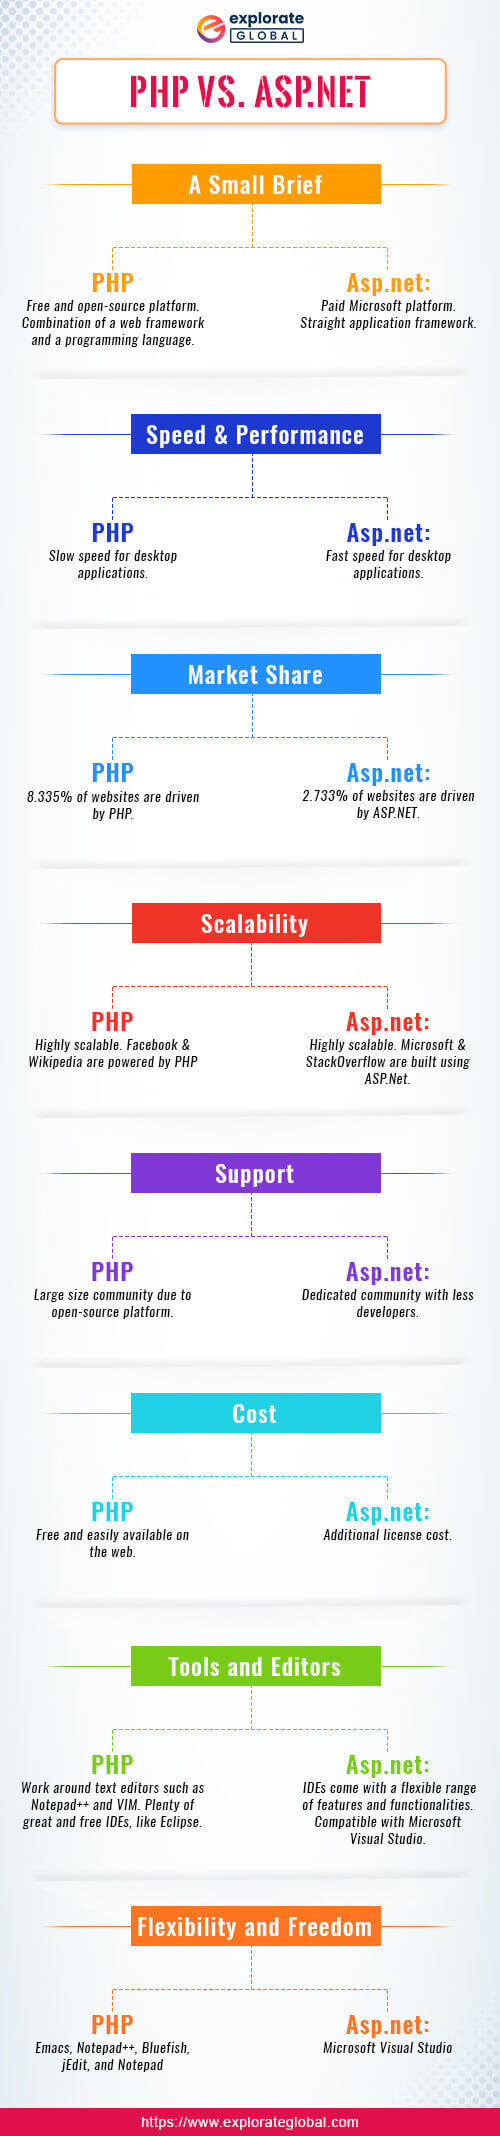 PHP vs Asp.net - infographic